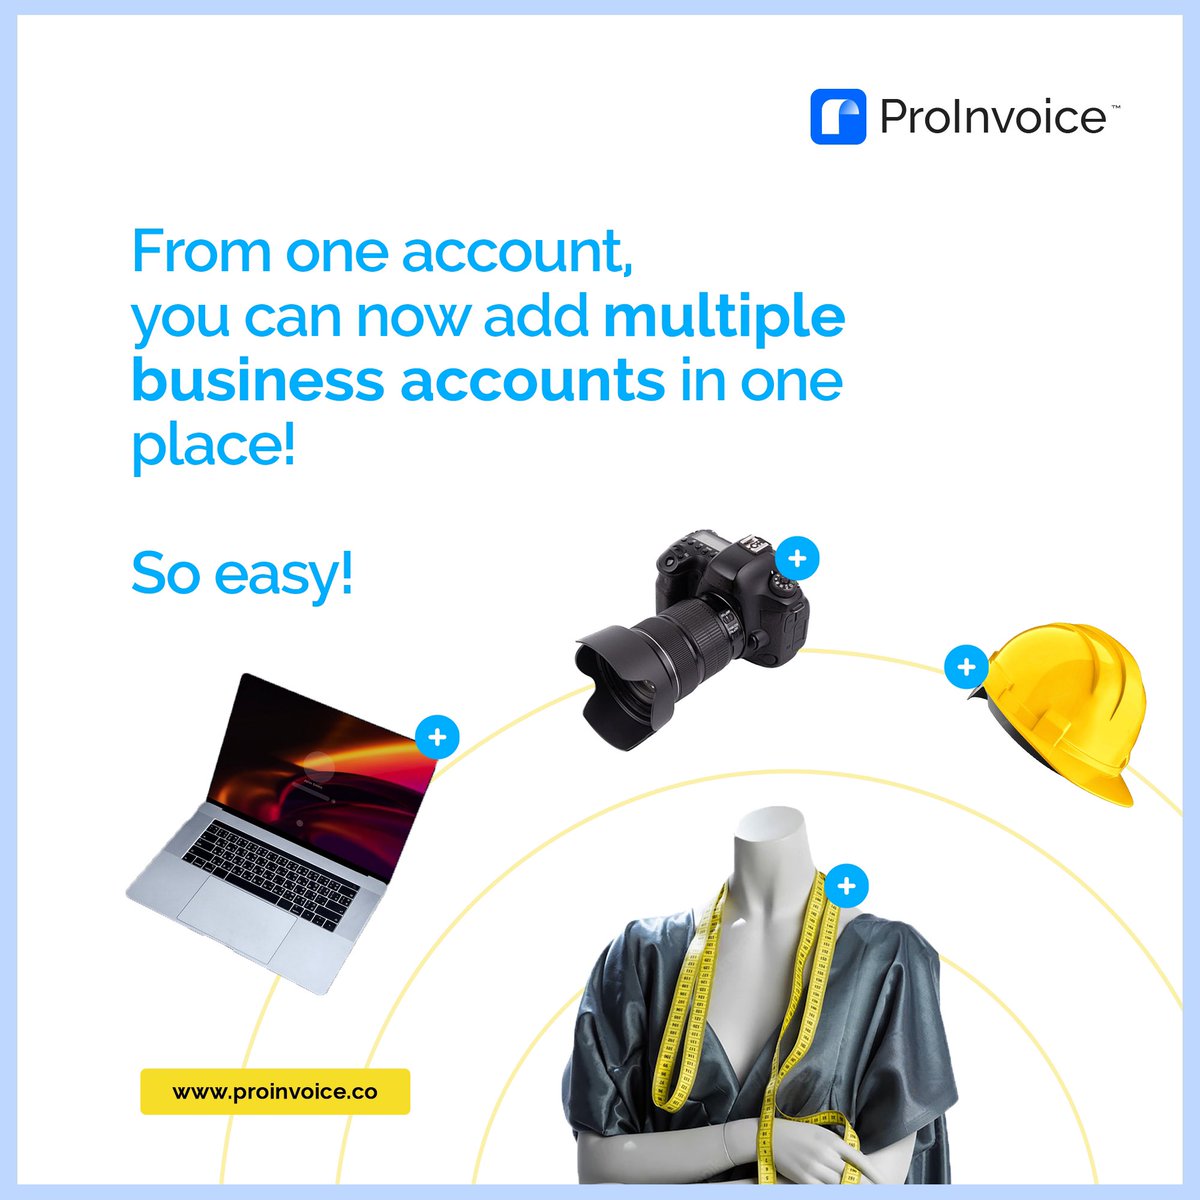 Create multiple business accounts for your businesses, generating invoices for each one. 
Create custom invoice templates to keep track of payments and expenses. Set up your new accounts on the go with our easy-to-use app.
 
#invoicesoftware #invoicegenerator #proinvoicesoftware